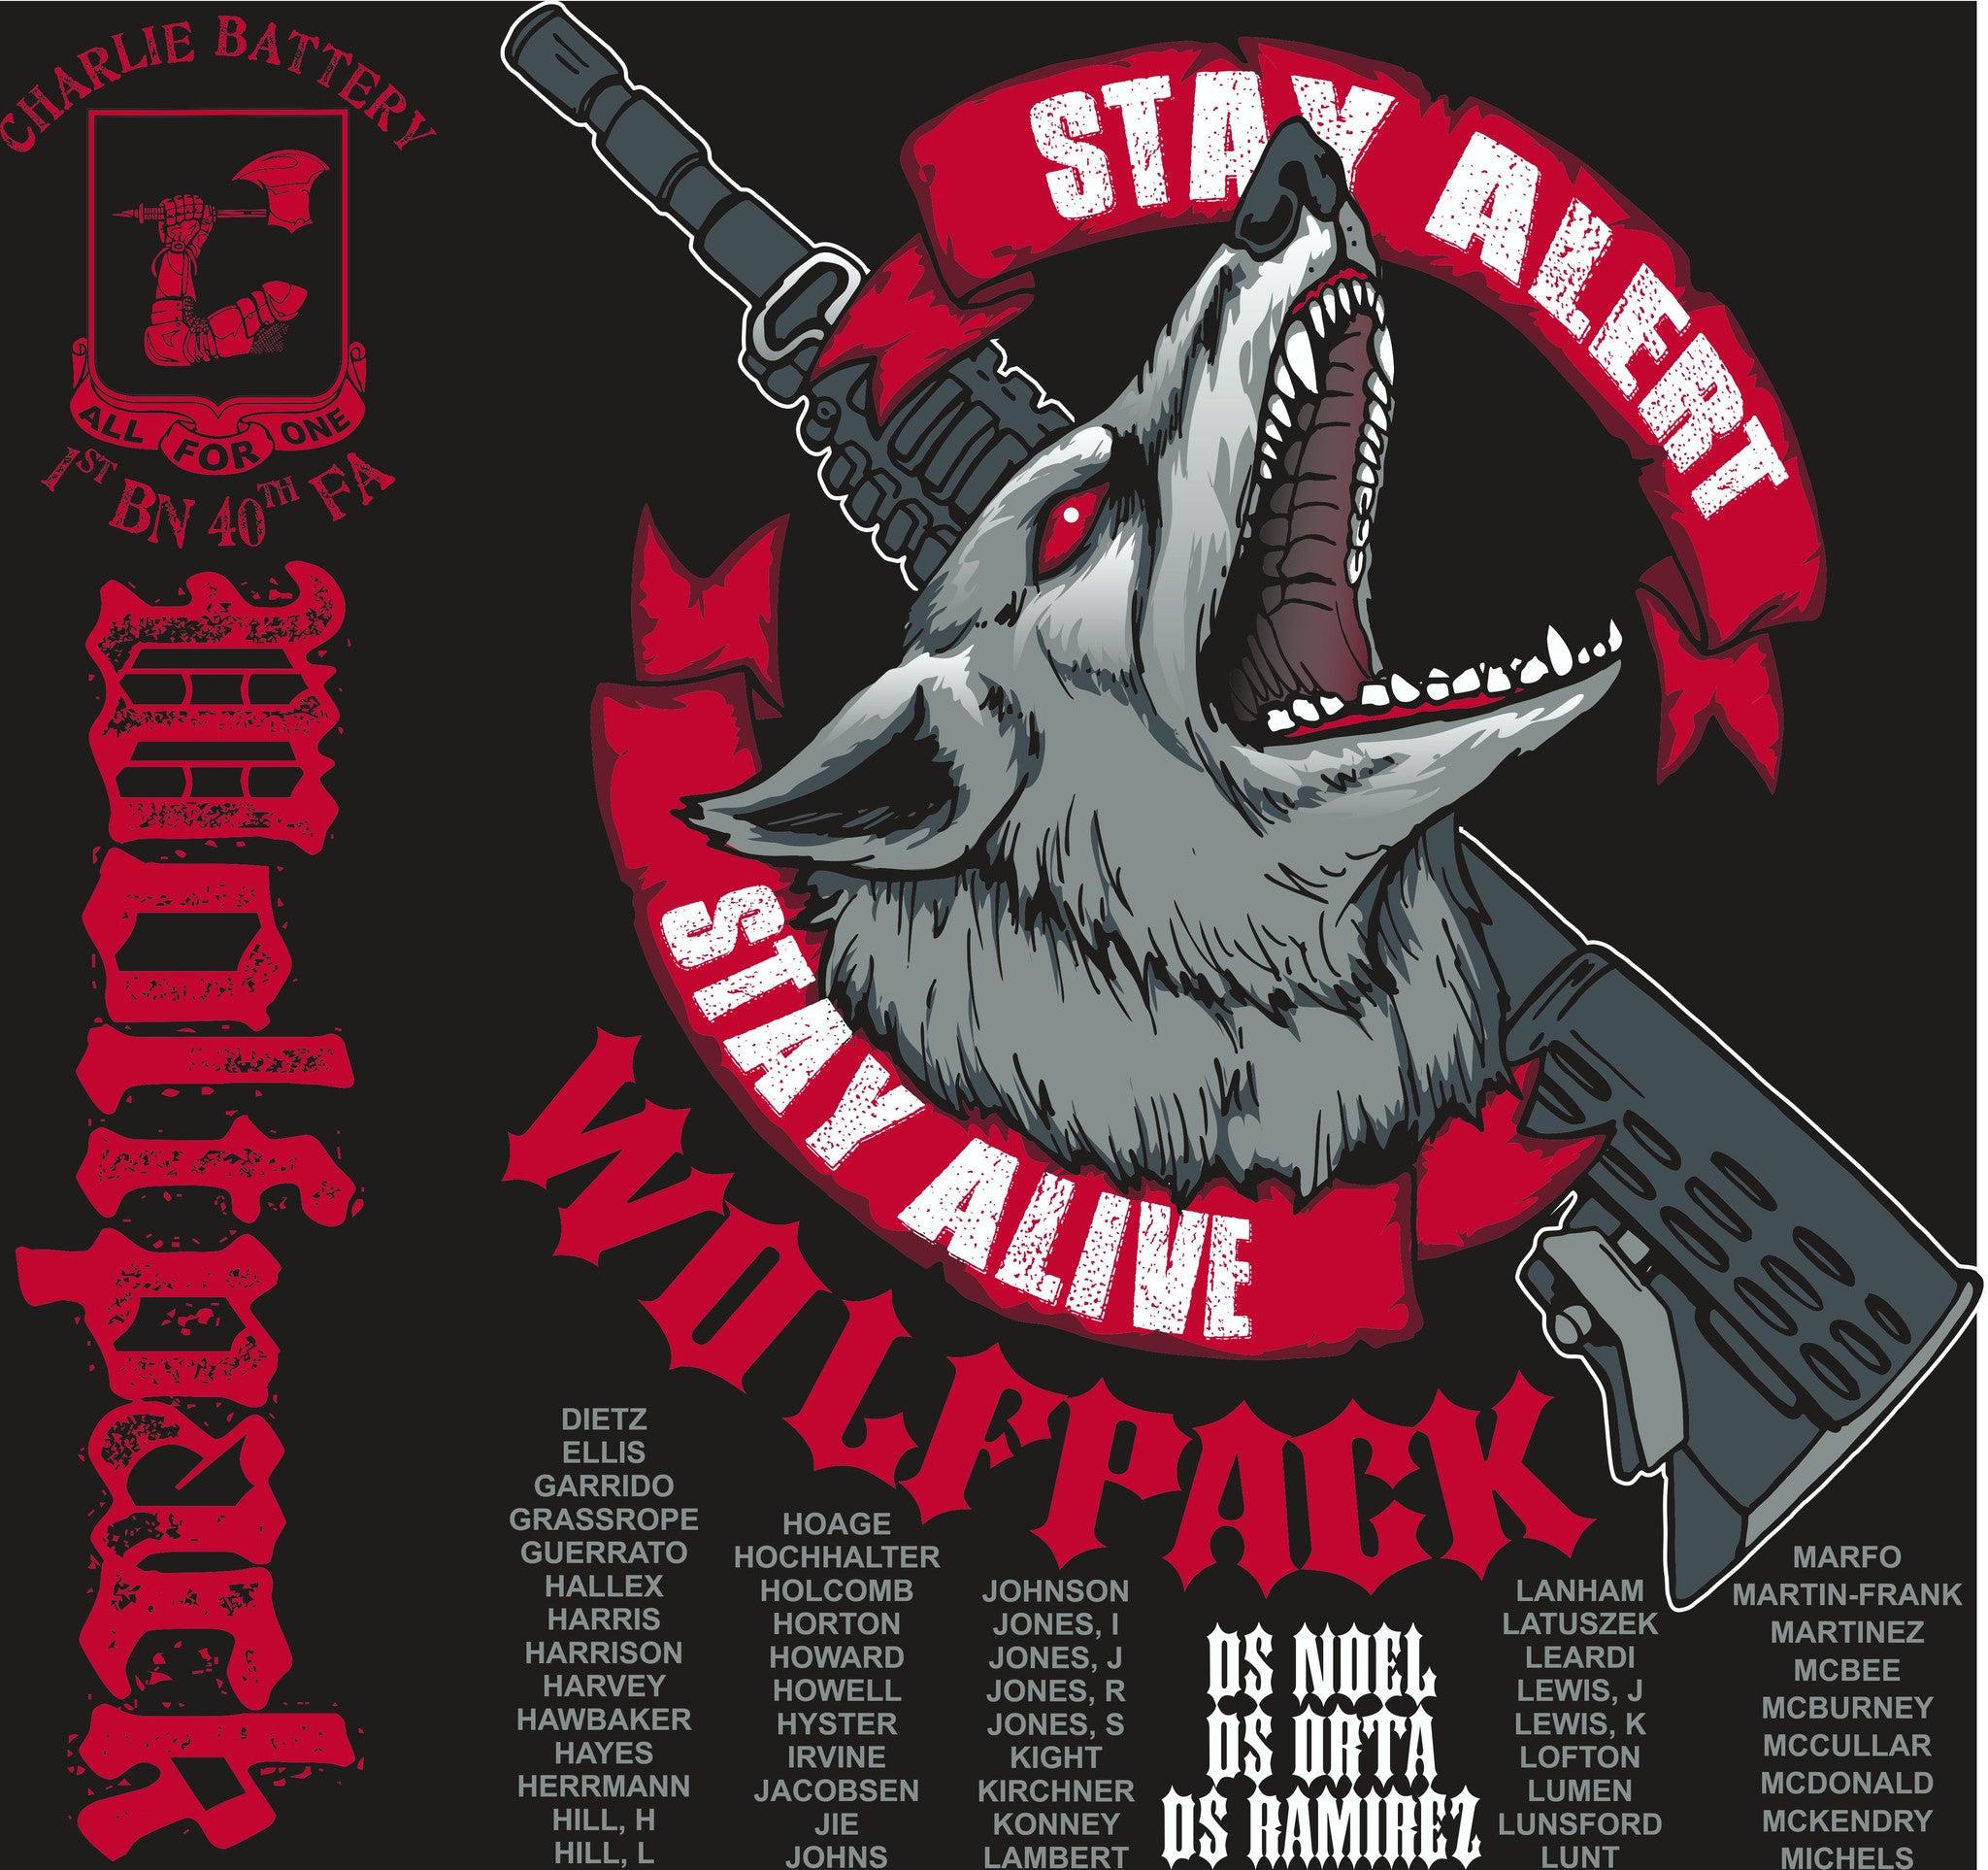 PLATOON SHIRTS (2nd generation print) CHARLIE 1st 40th WOLFPACK AUG 2016